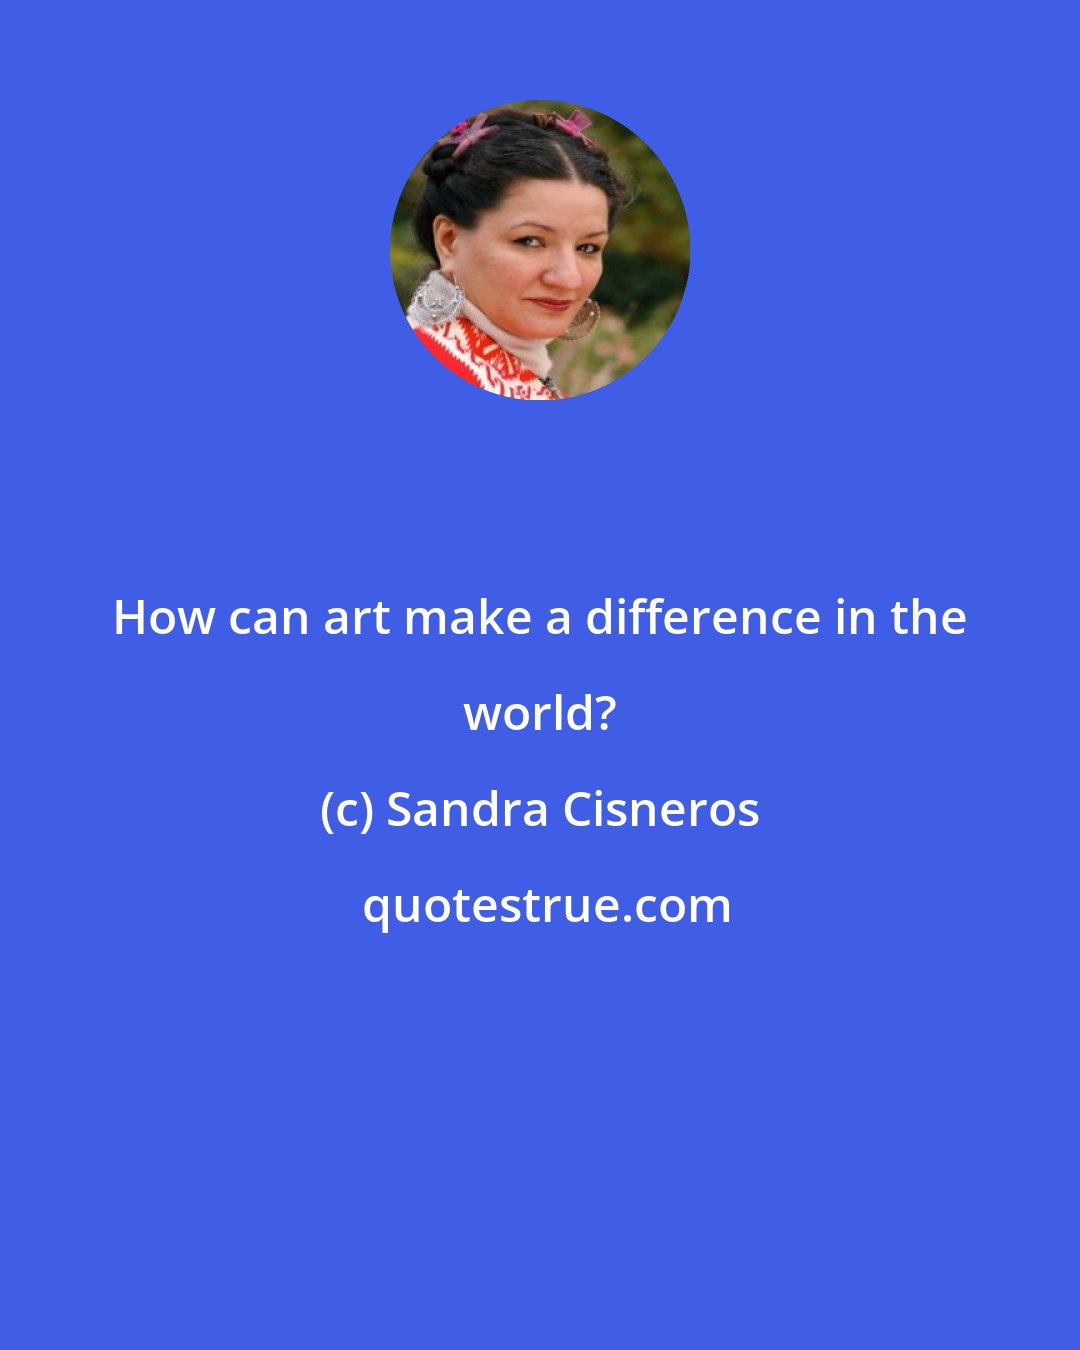 Sandra Cisneros: How can art make a difference in the world?